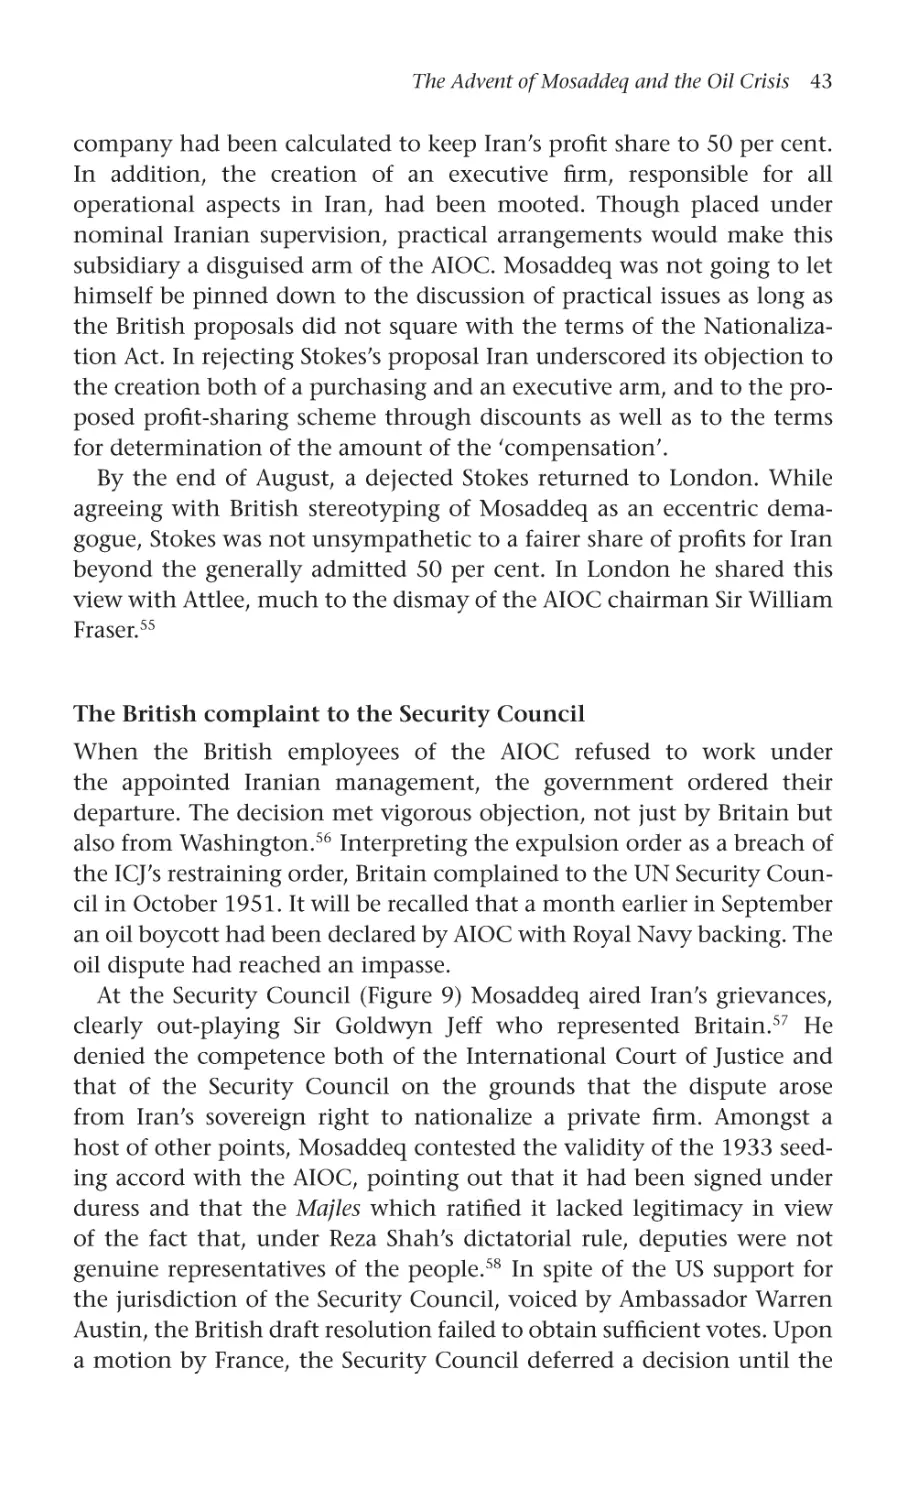 The British complaint to the Security Council